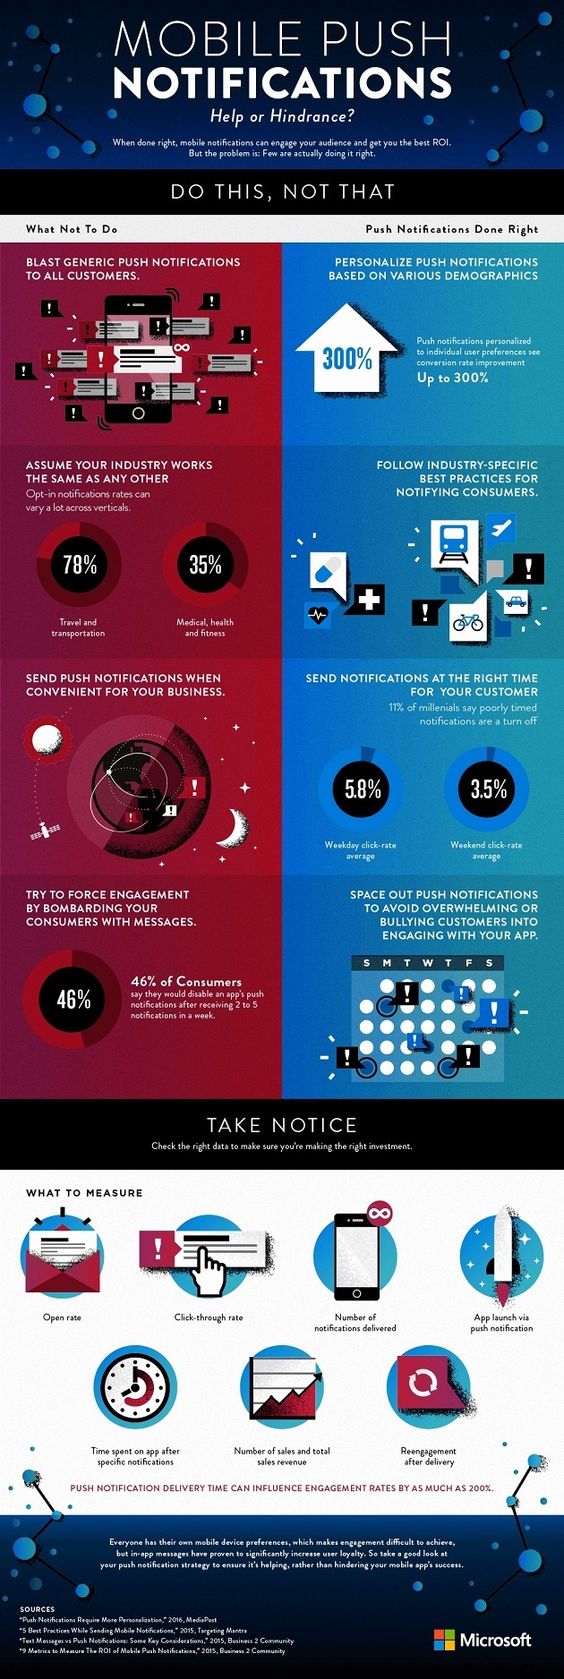 Are mobile push notifications working, or irritating mobile customers? This Microsoft infographic explores the topic.